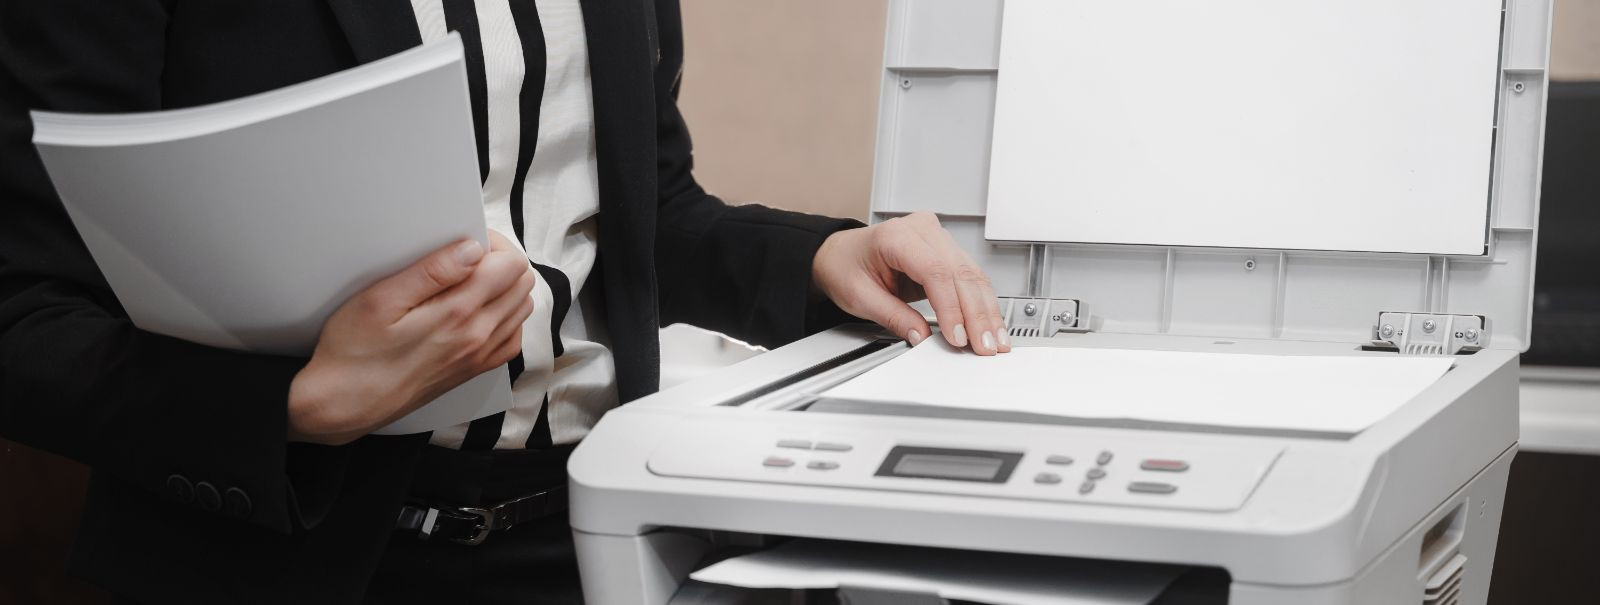 As businesses strive for efficiency and productivity, the role of office equipment, particularly printers, becomes increasingly significant. However, the enviro